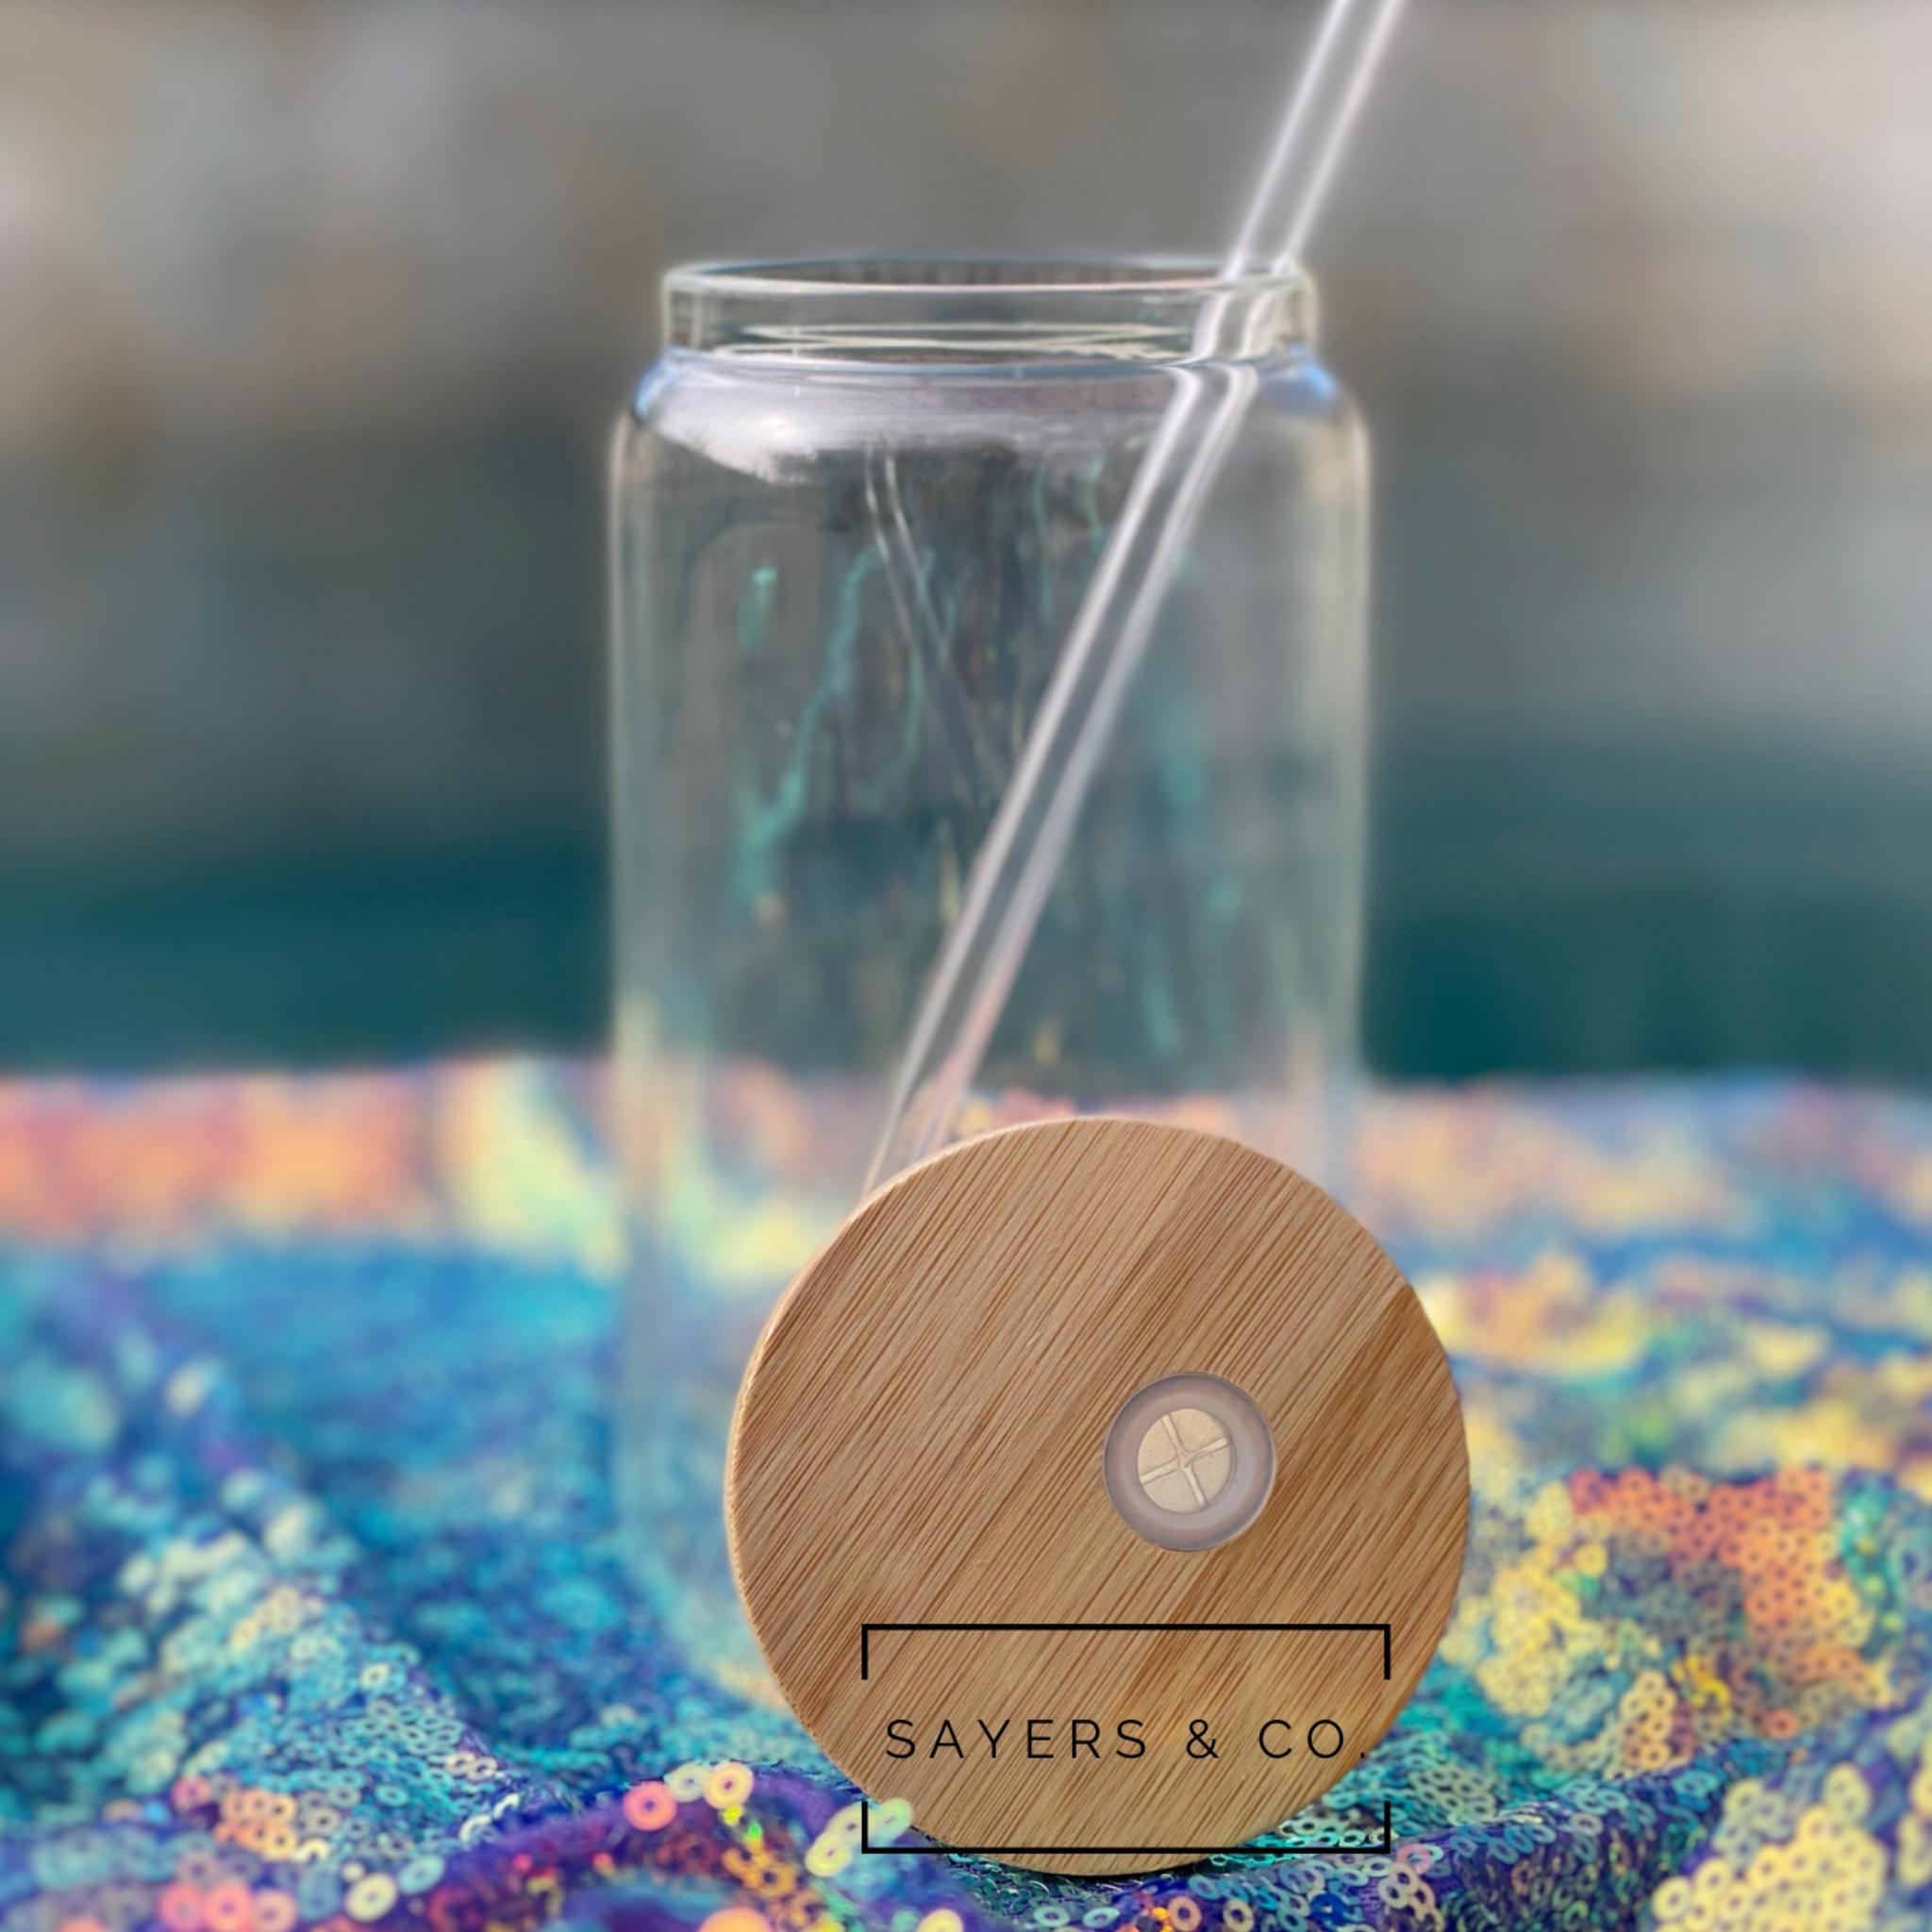 Joytra Sublimation Glass Blanks with Bamboo Lid and Straws - 16oz